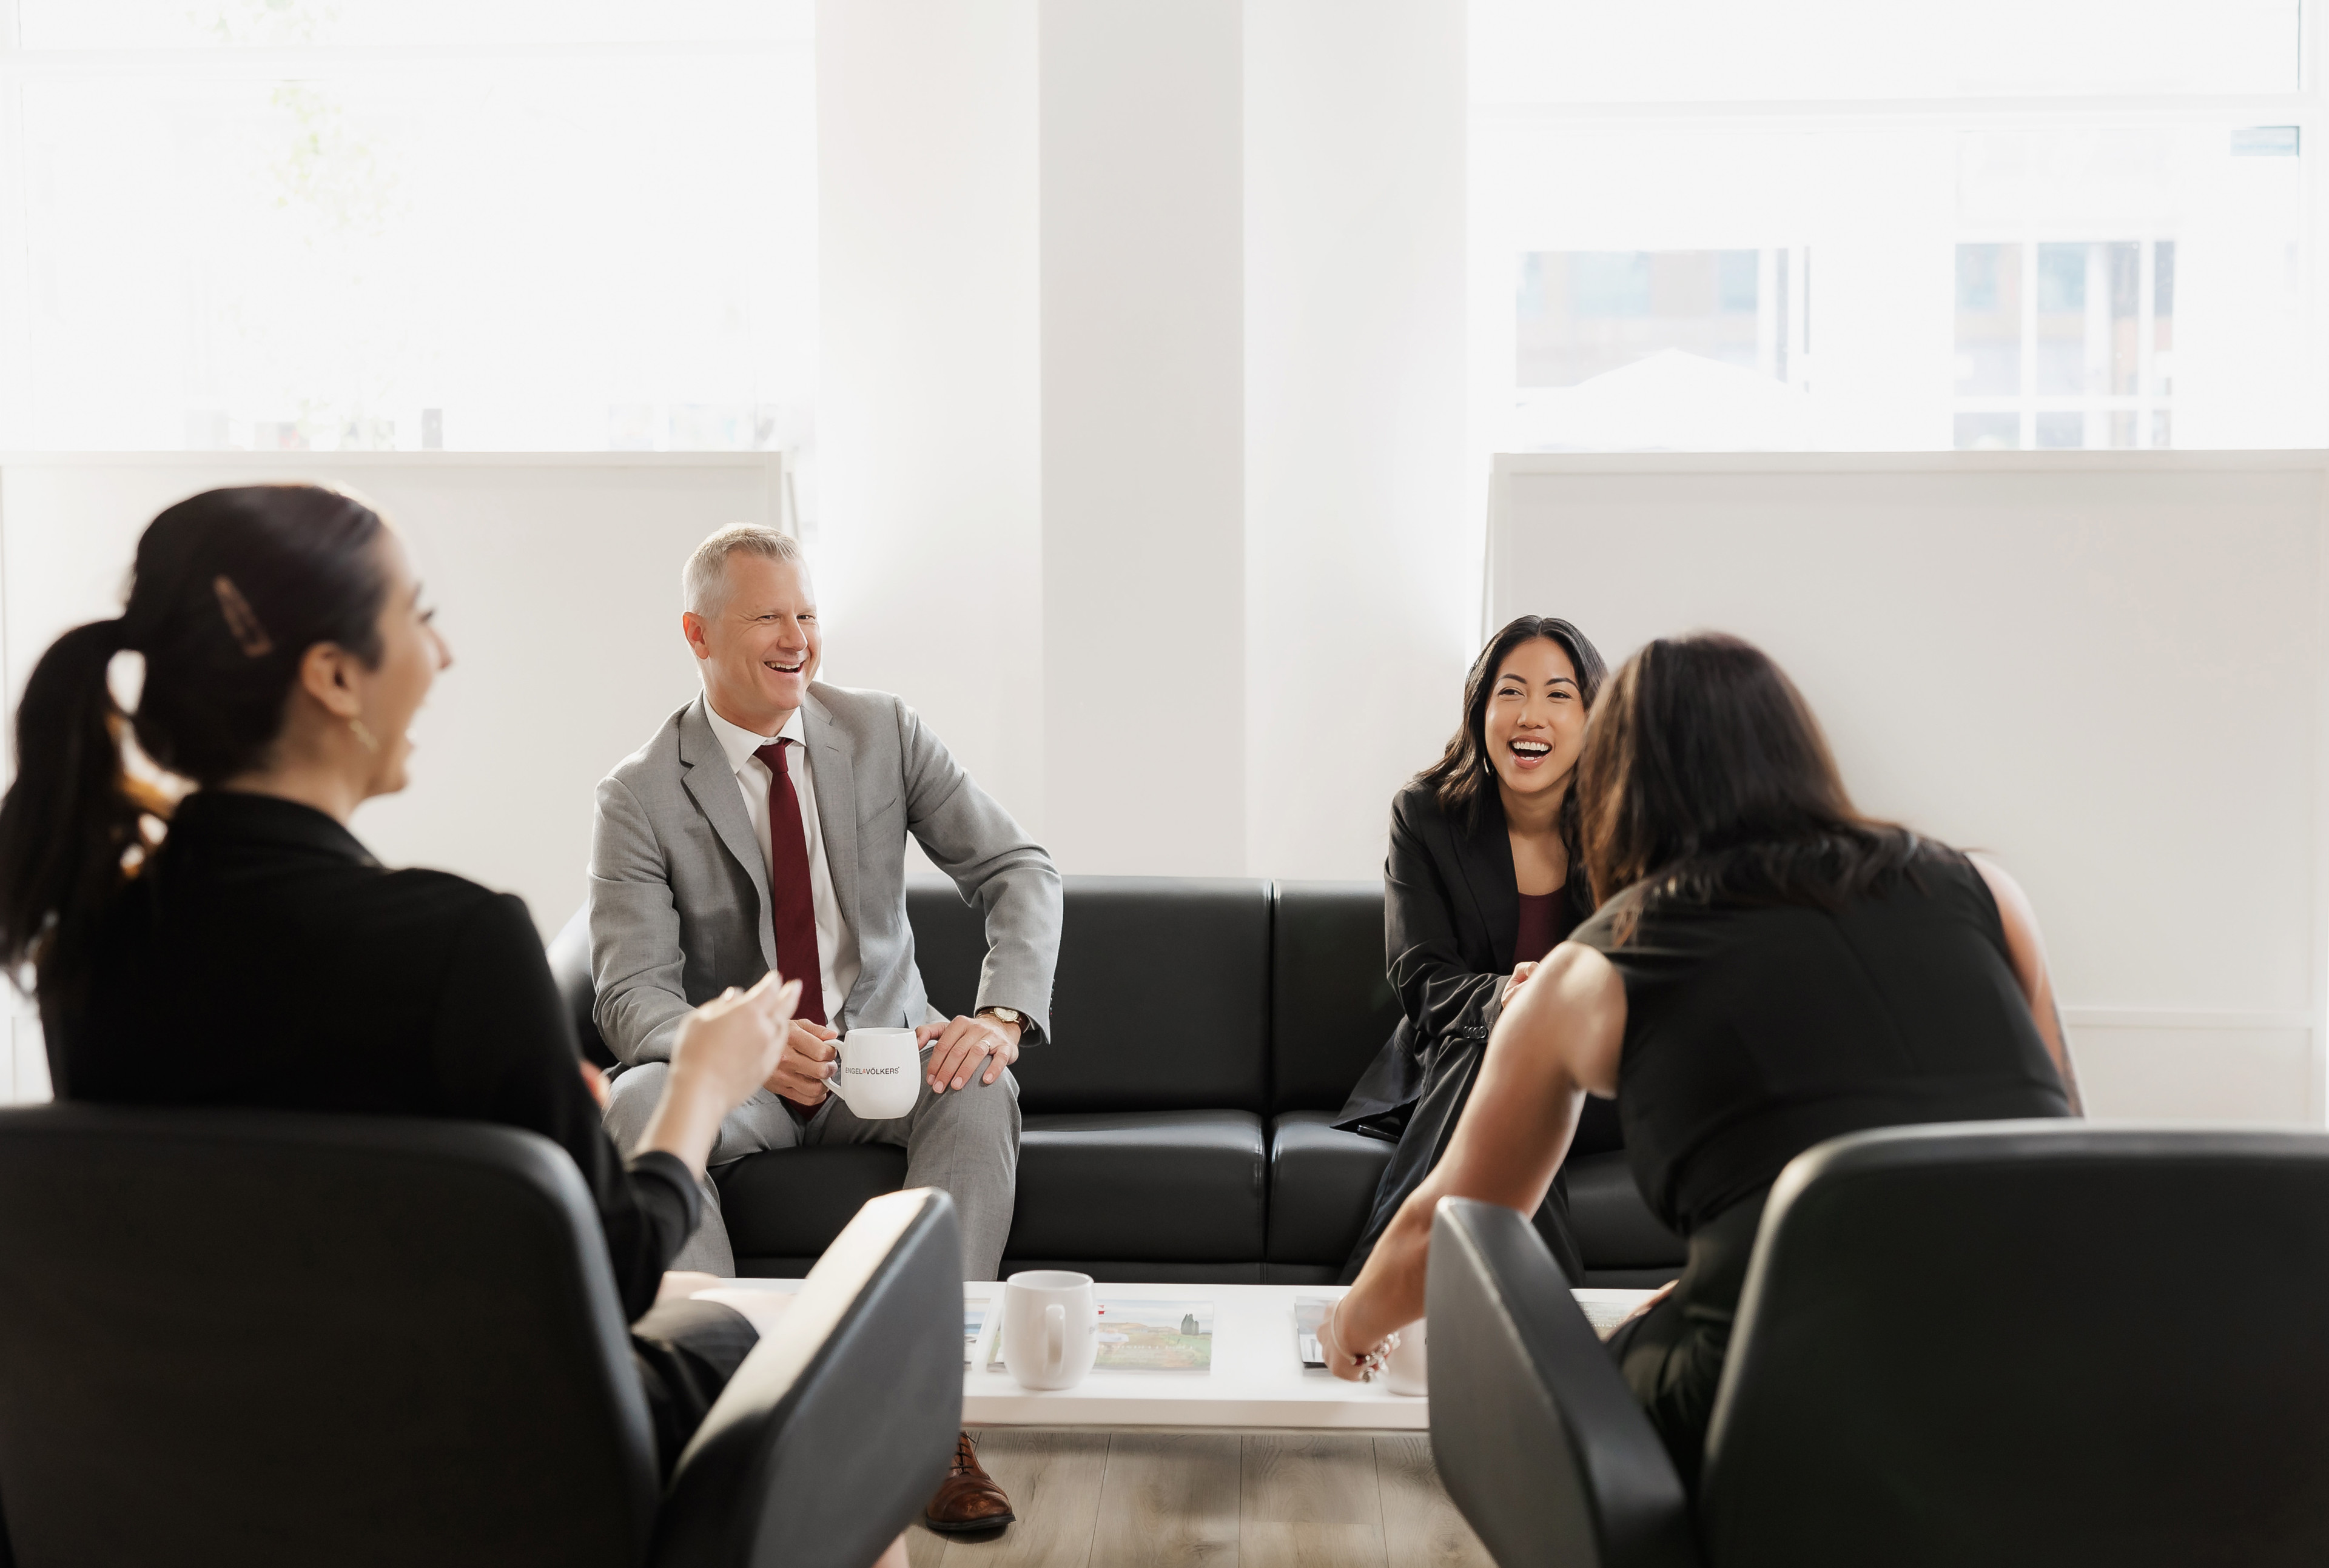 Photo of a group of people smiling and discussing business